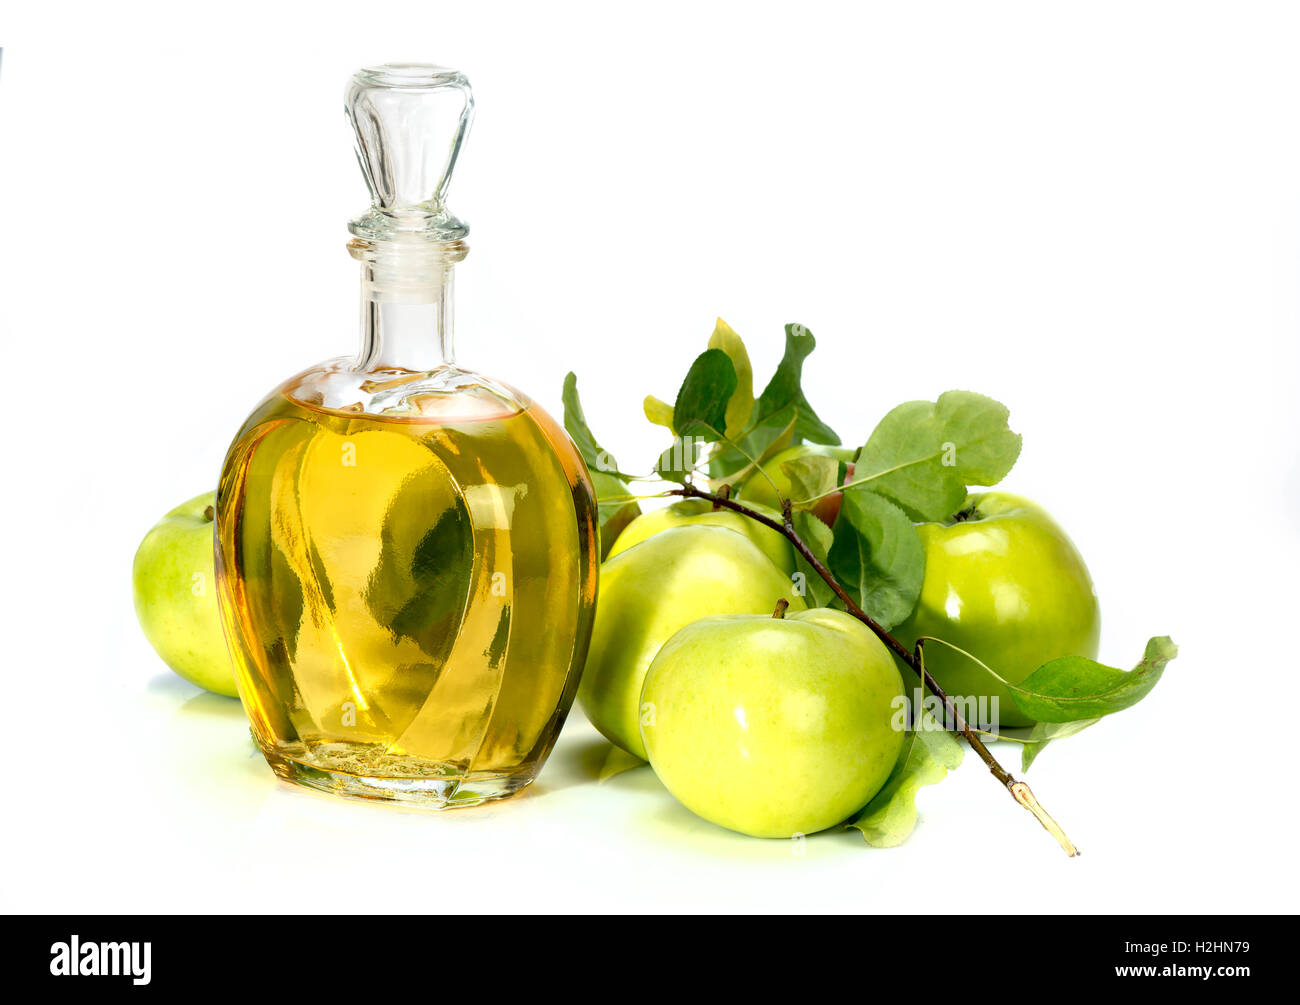 apple cider vinegar in a glass vessel and green apples isolated on white background Stock Photo